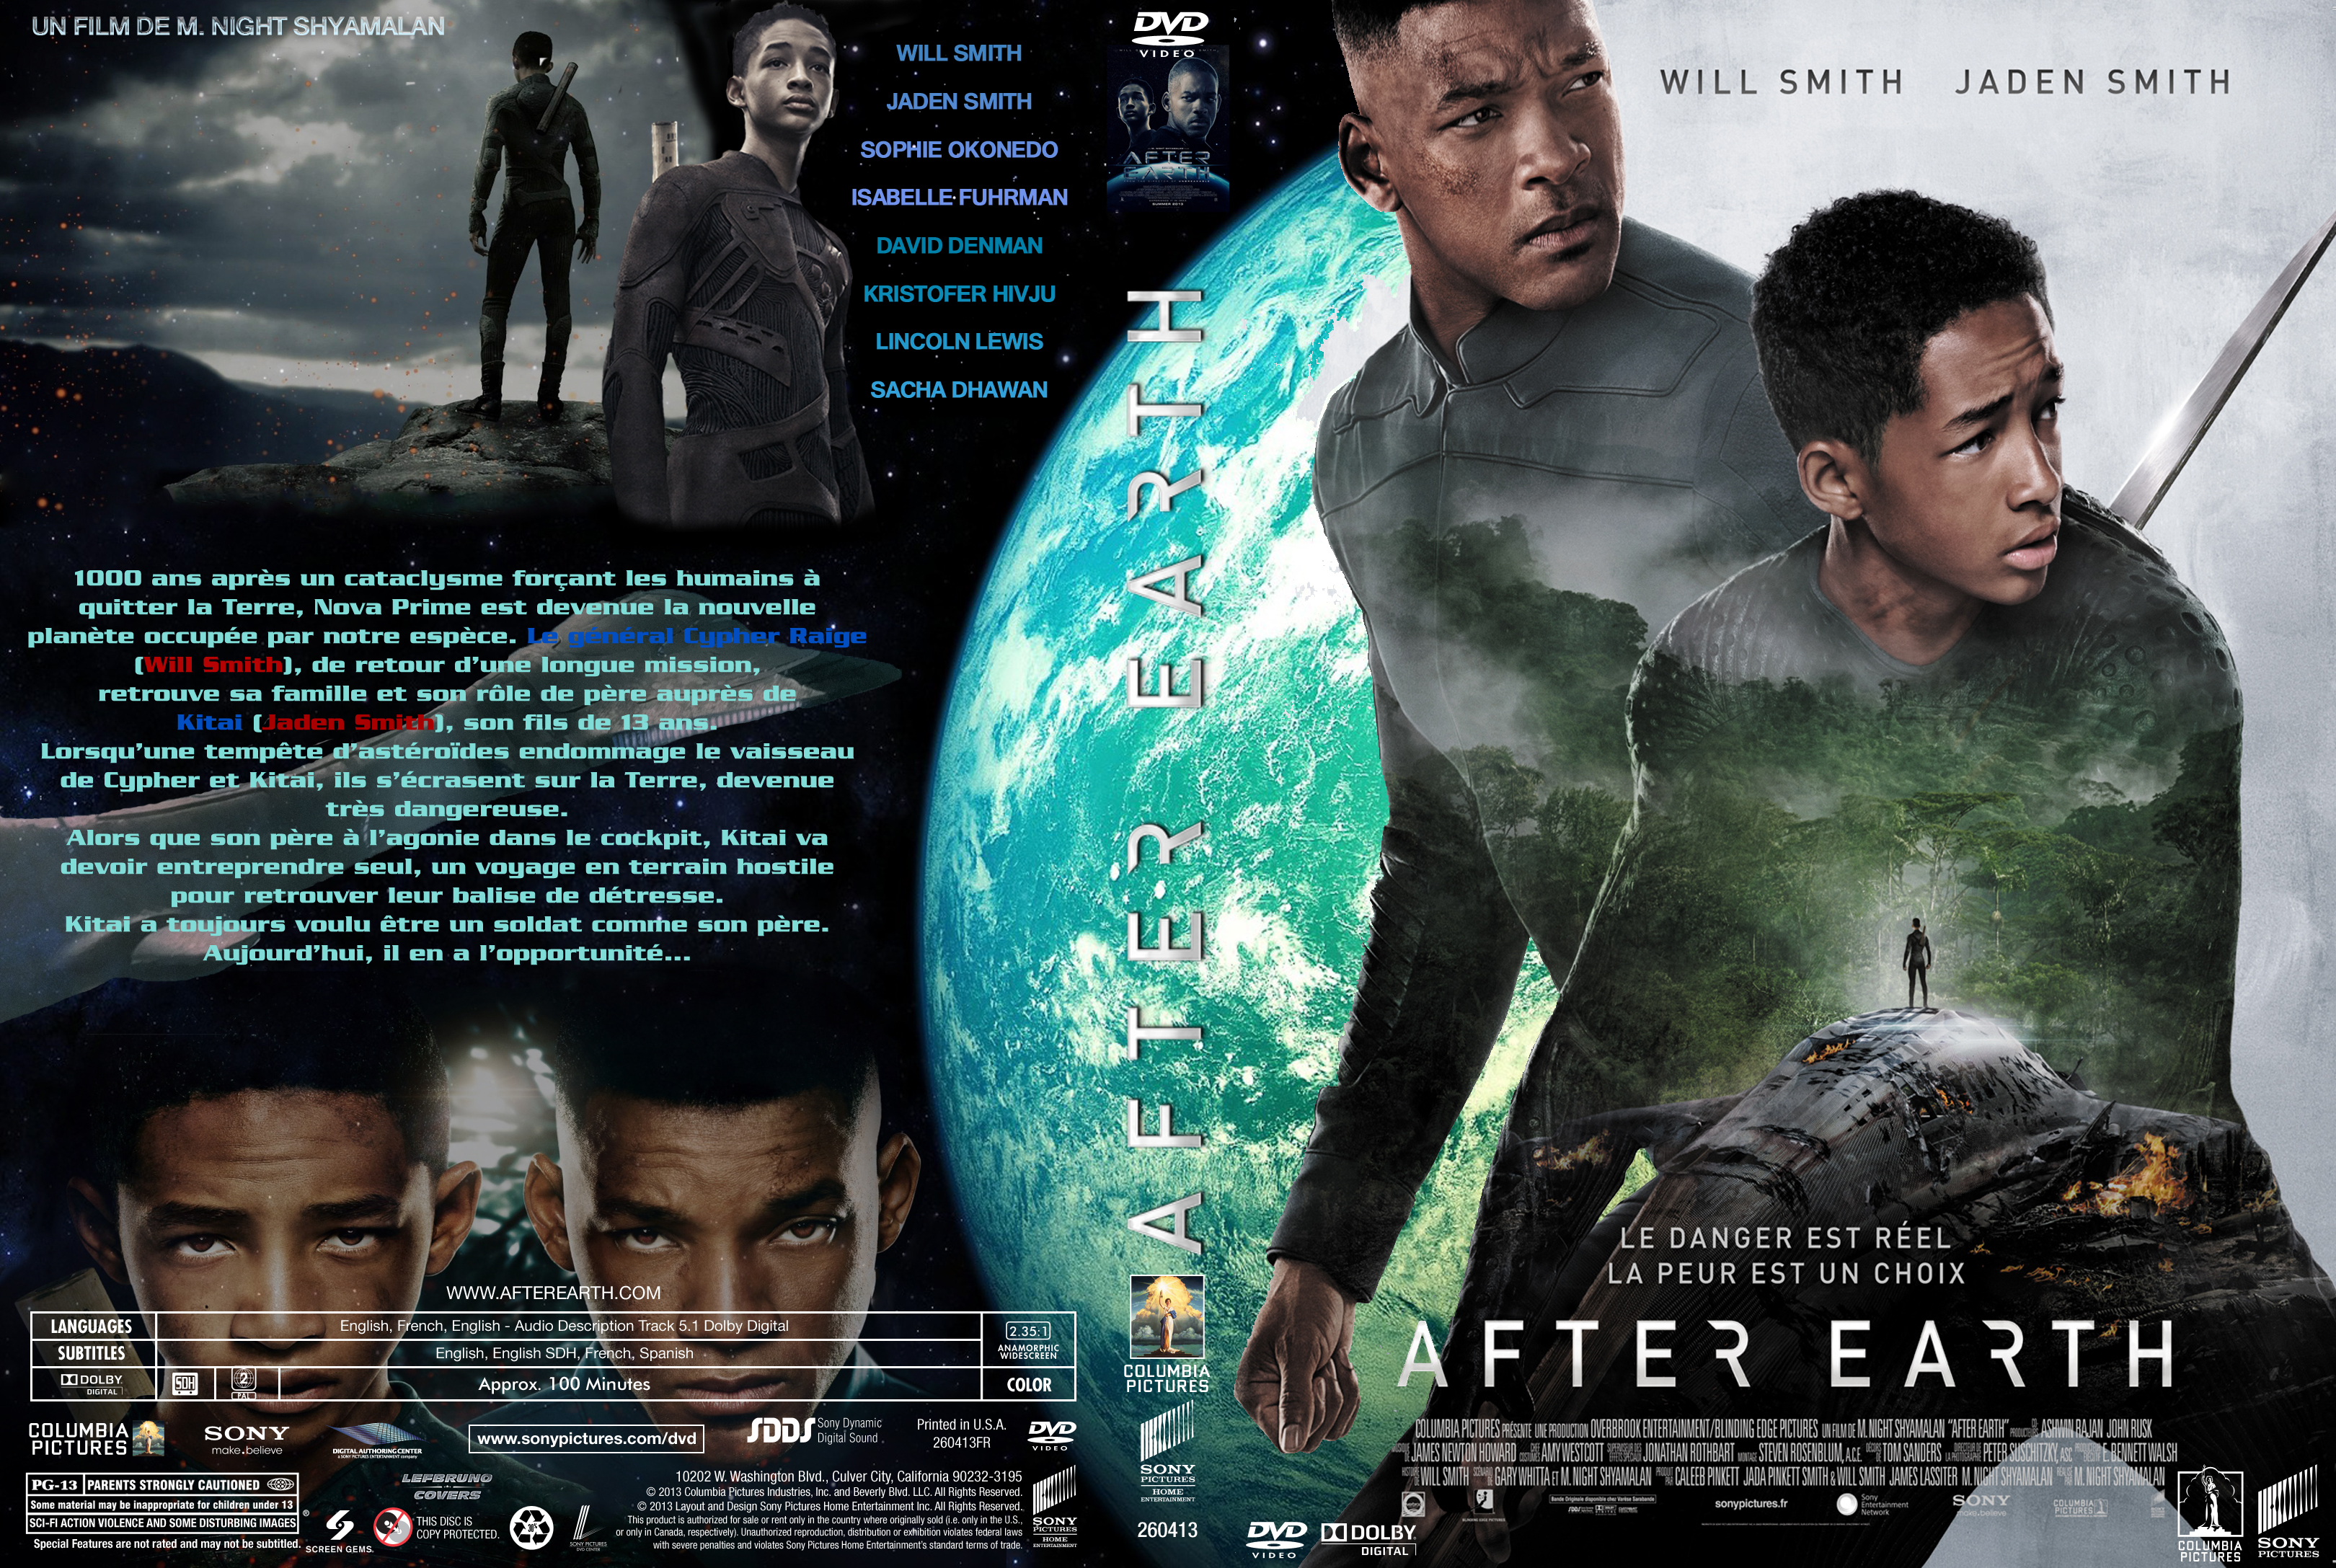 Jaquette DVD After Earth custom